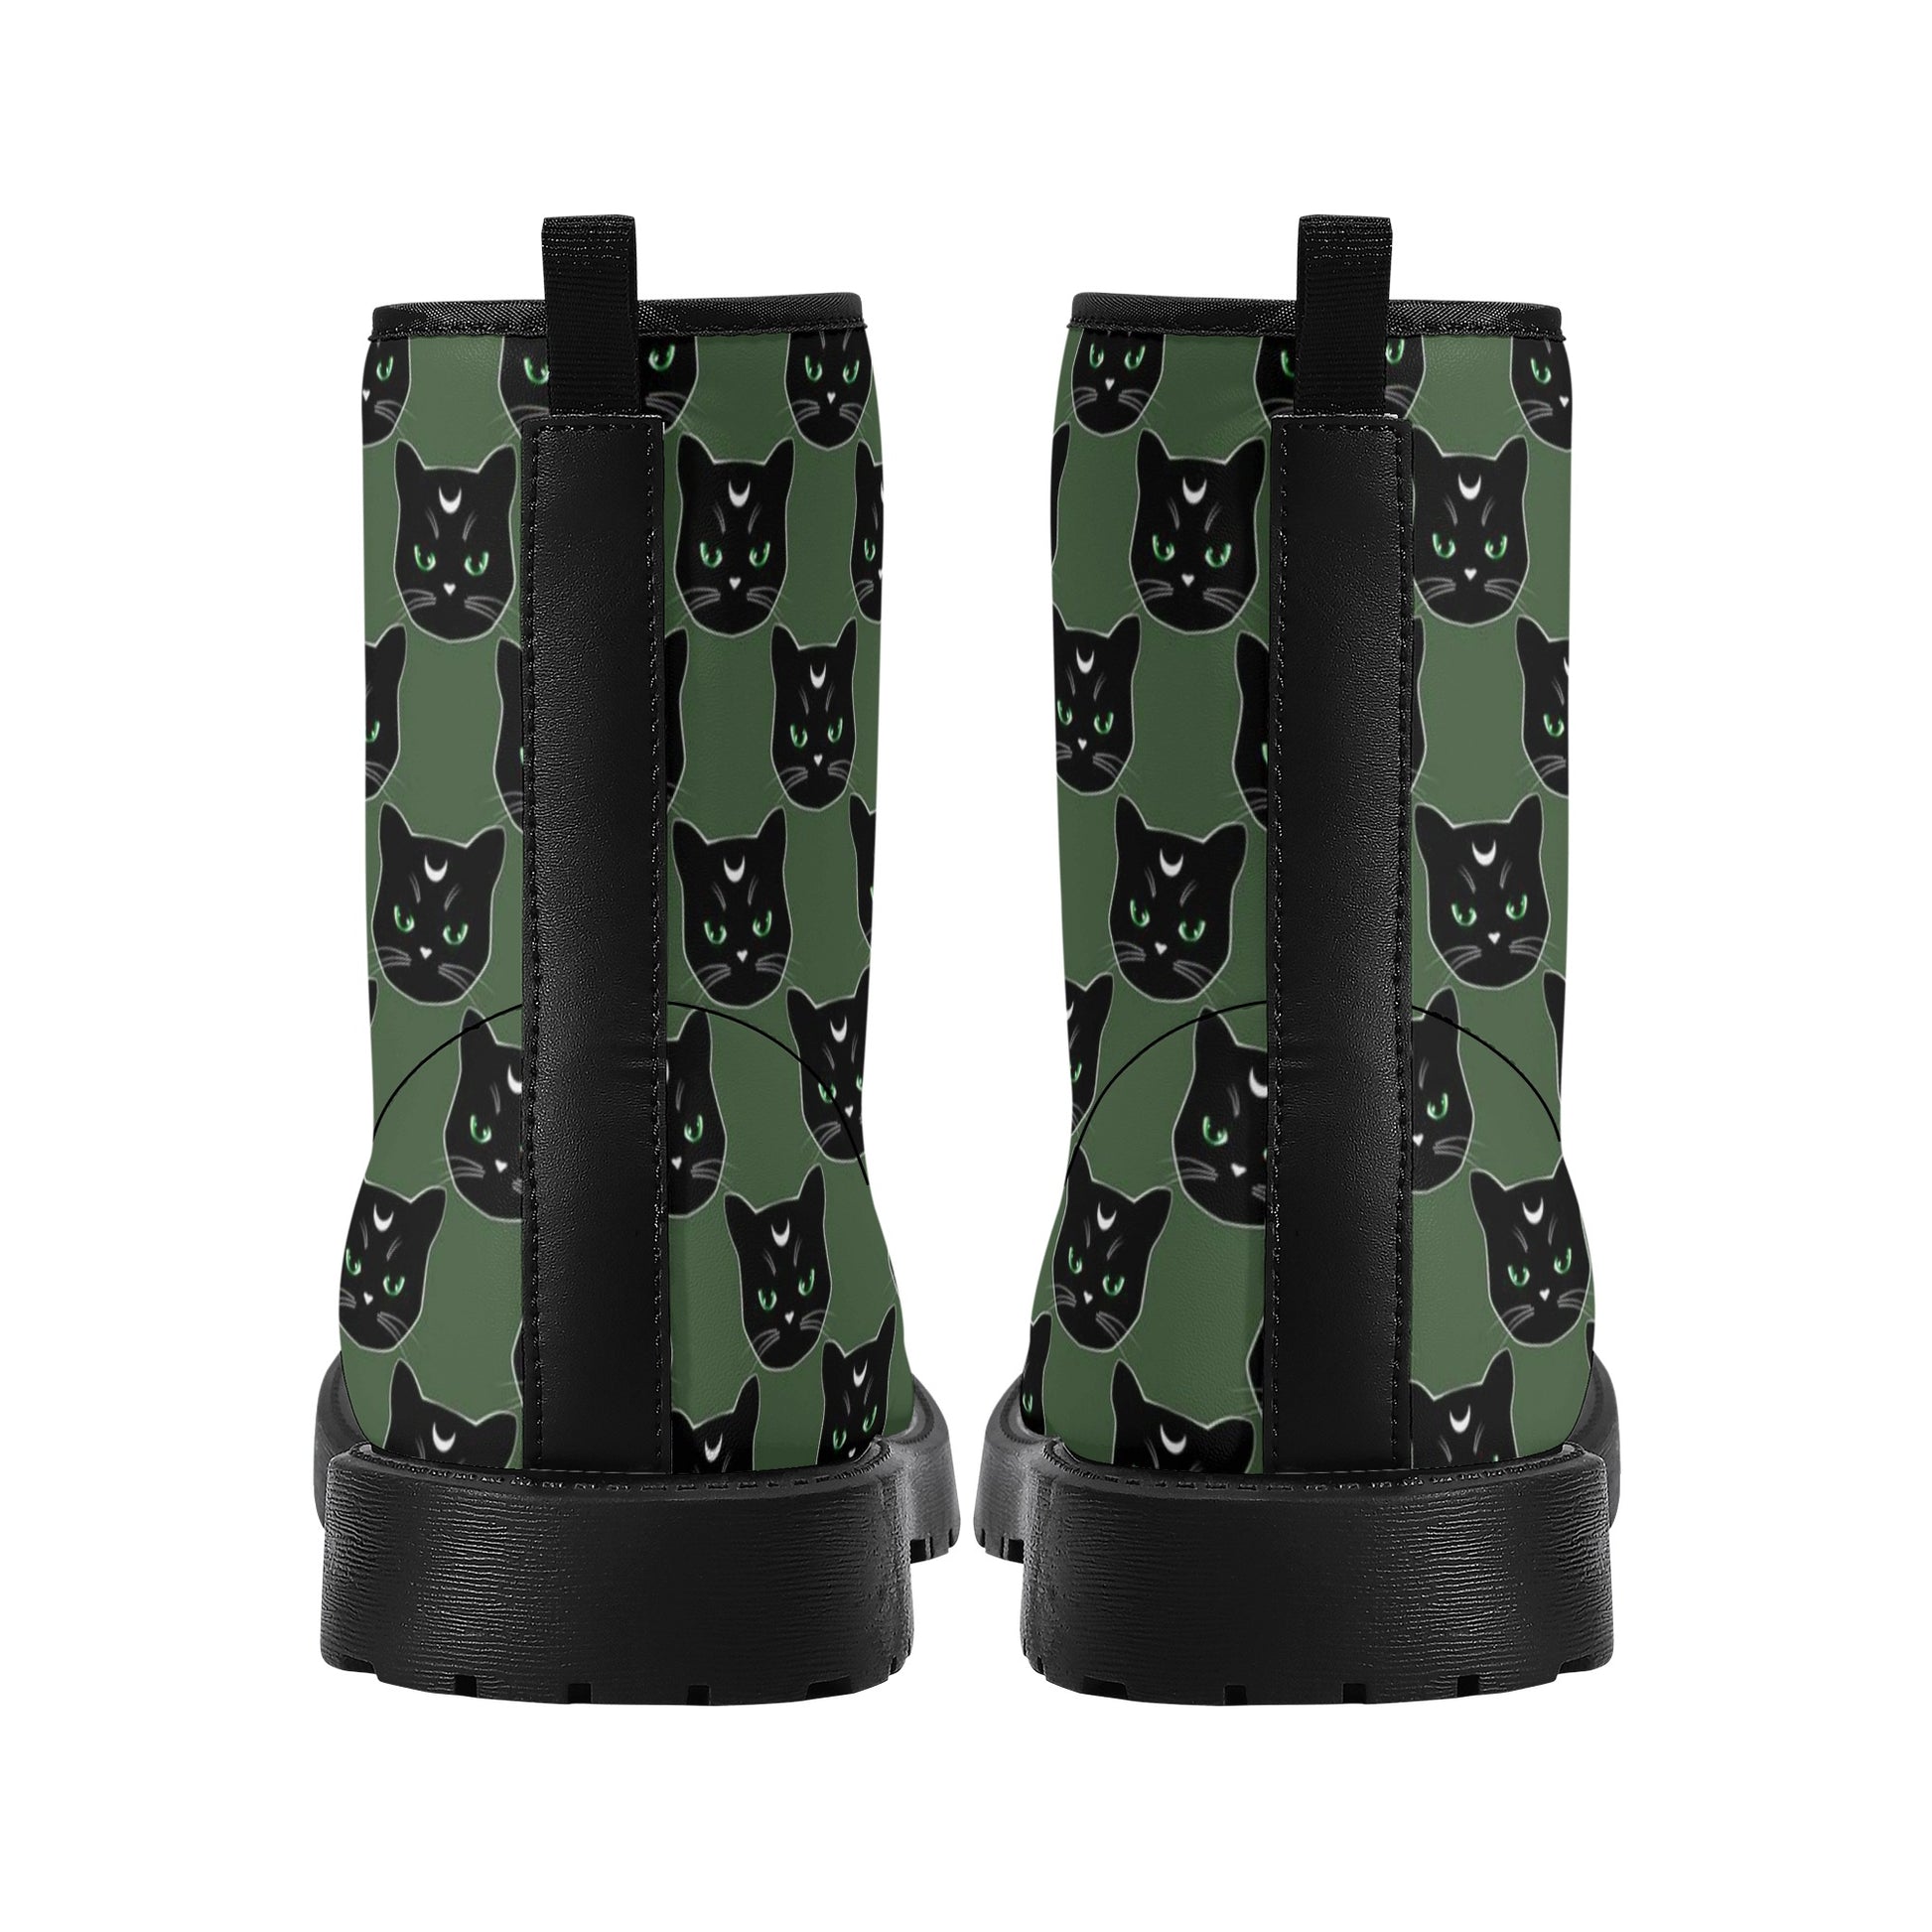 Military Green Cat Boots Women's Leather Boots